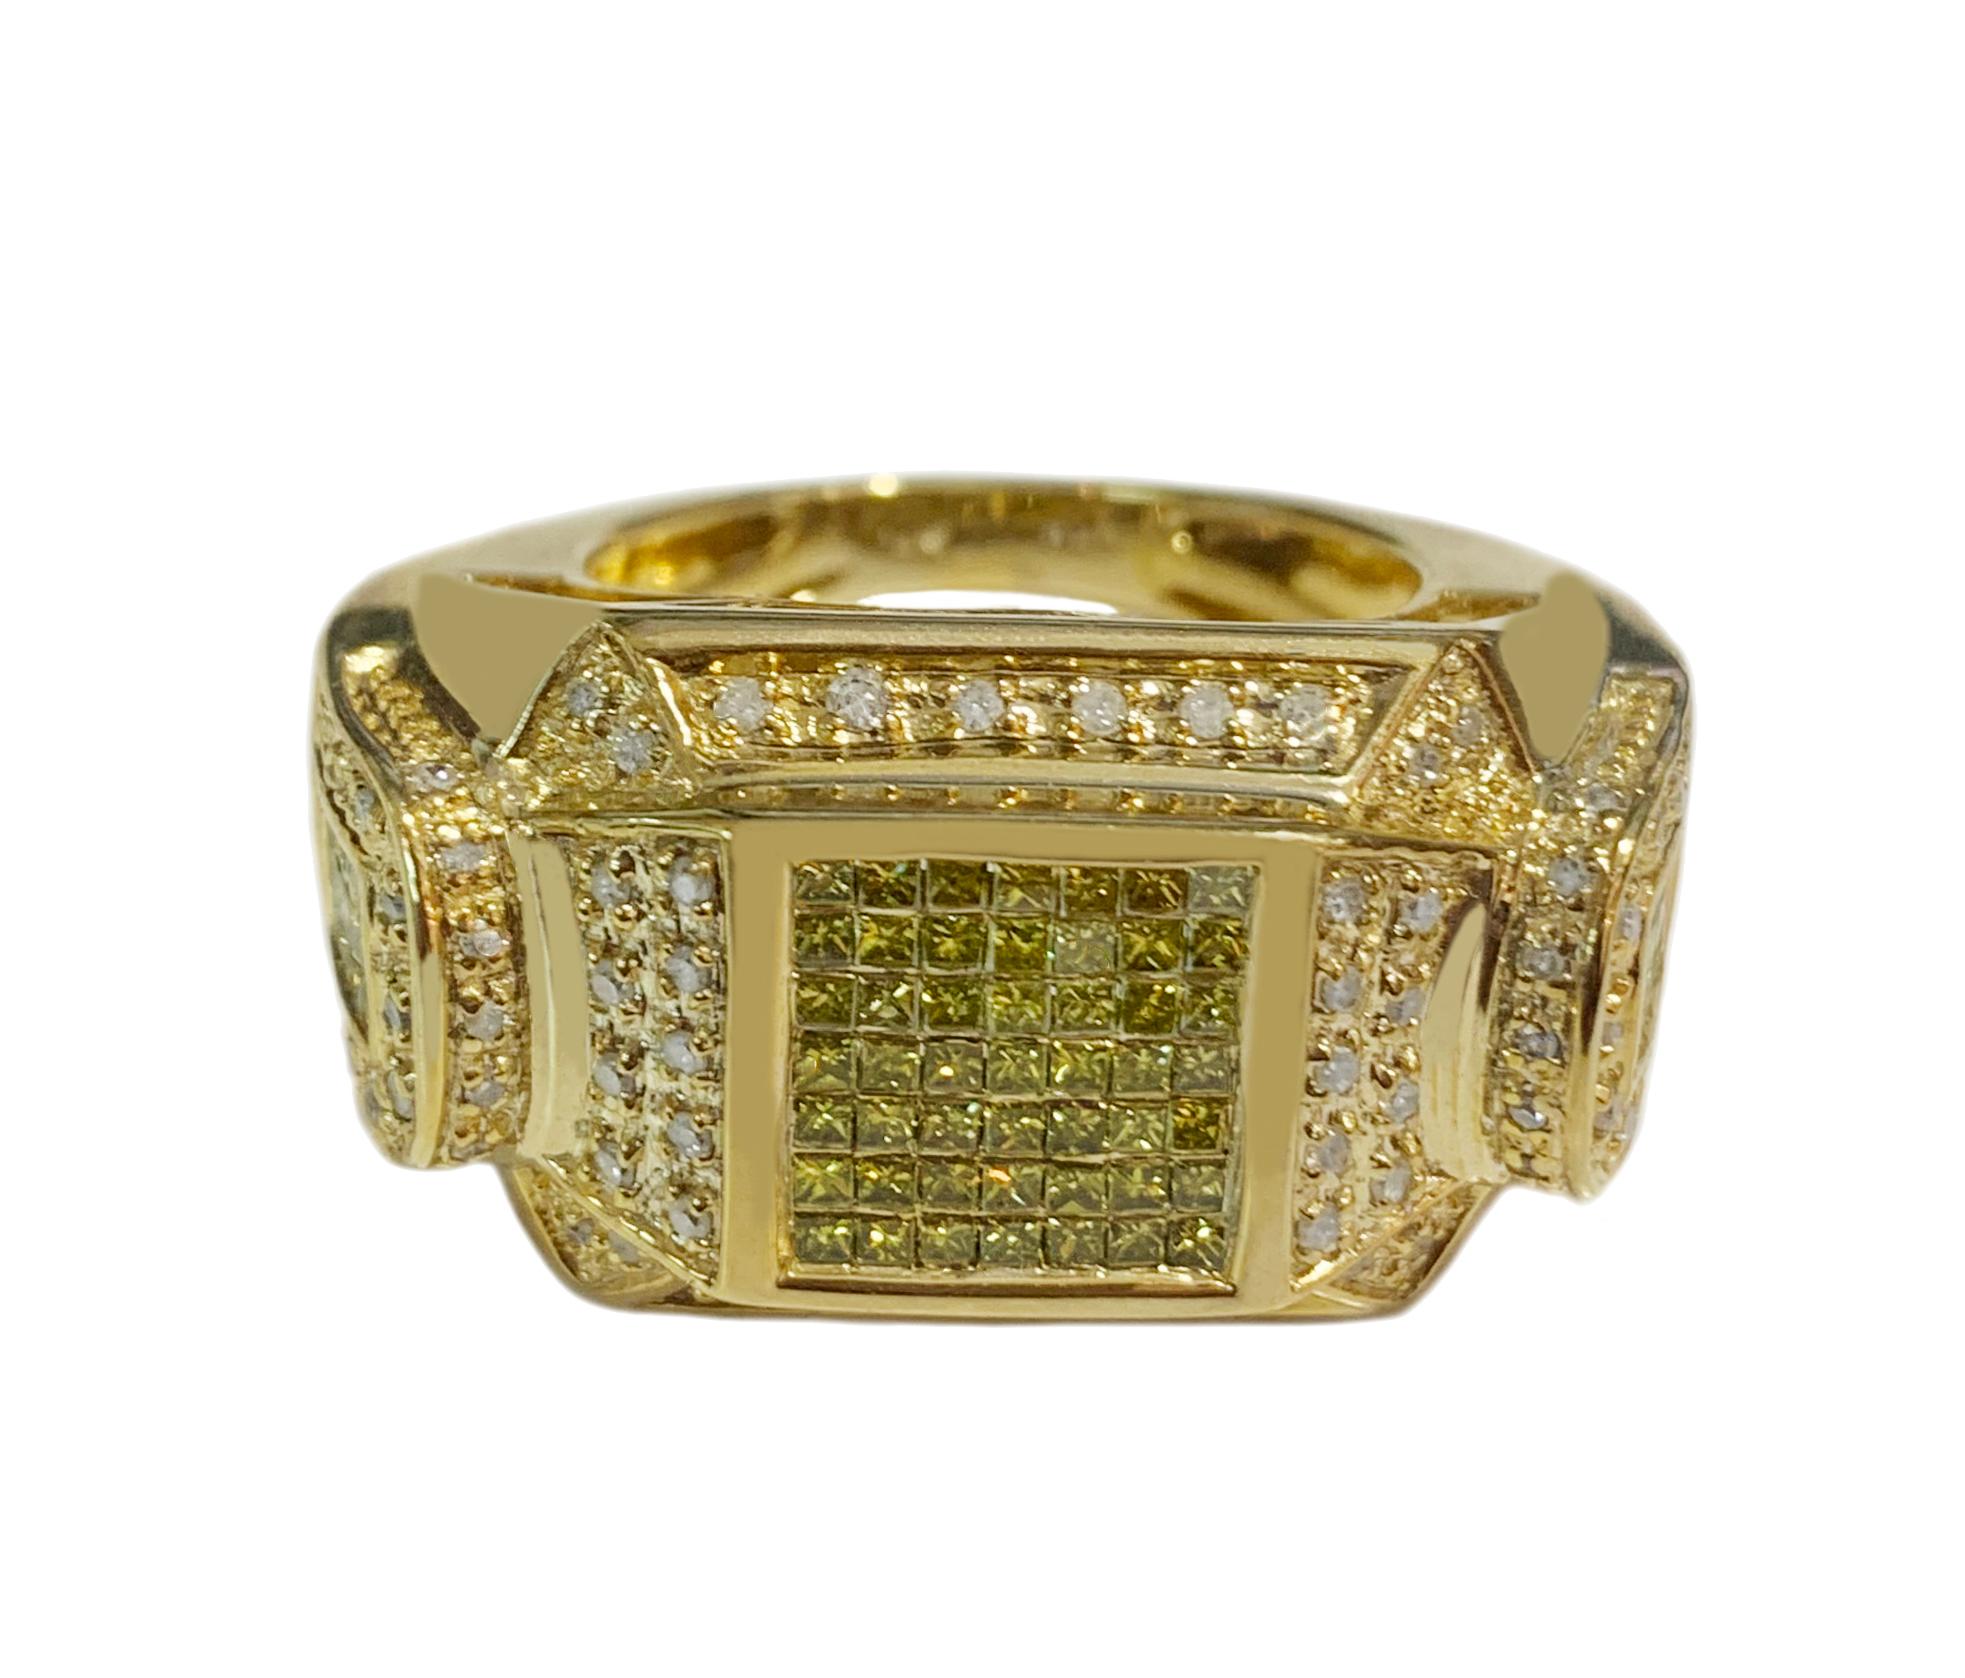 -Custom made

-14k Yellow gold

-Ring size: 9.5

-Weight: 16.7gr

-Ring width: 0.15-0.7”

-Diamond: 3.1ct, SI clarity, G color